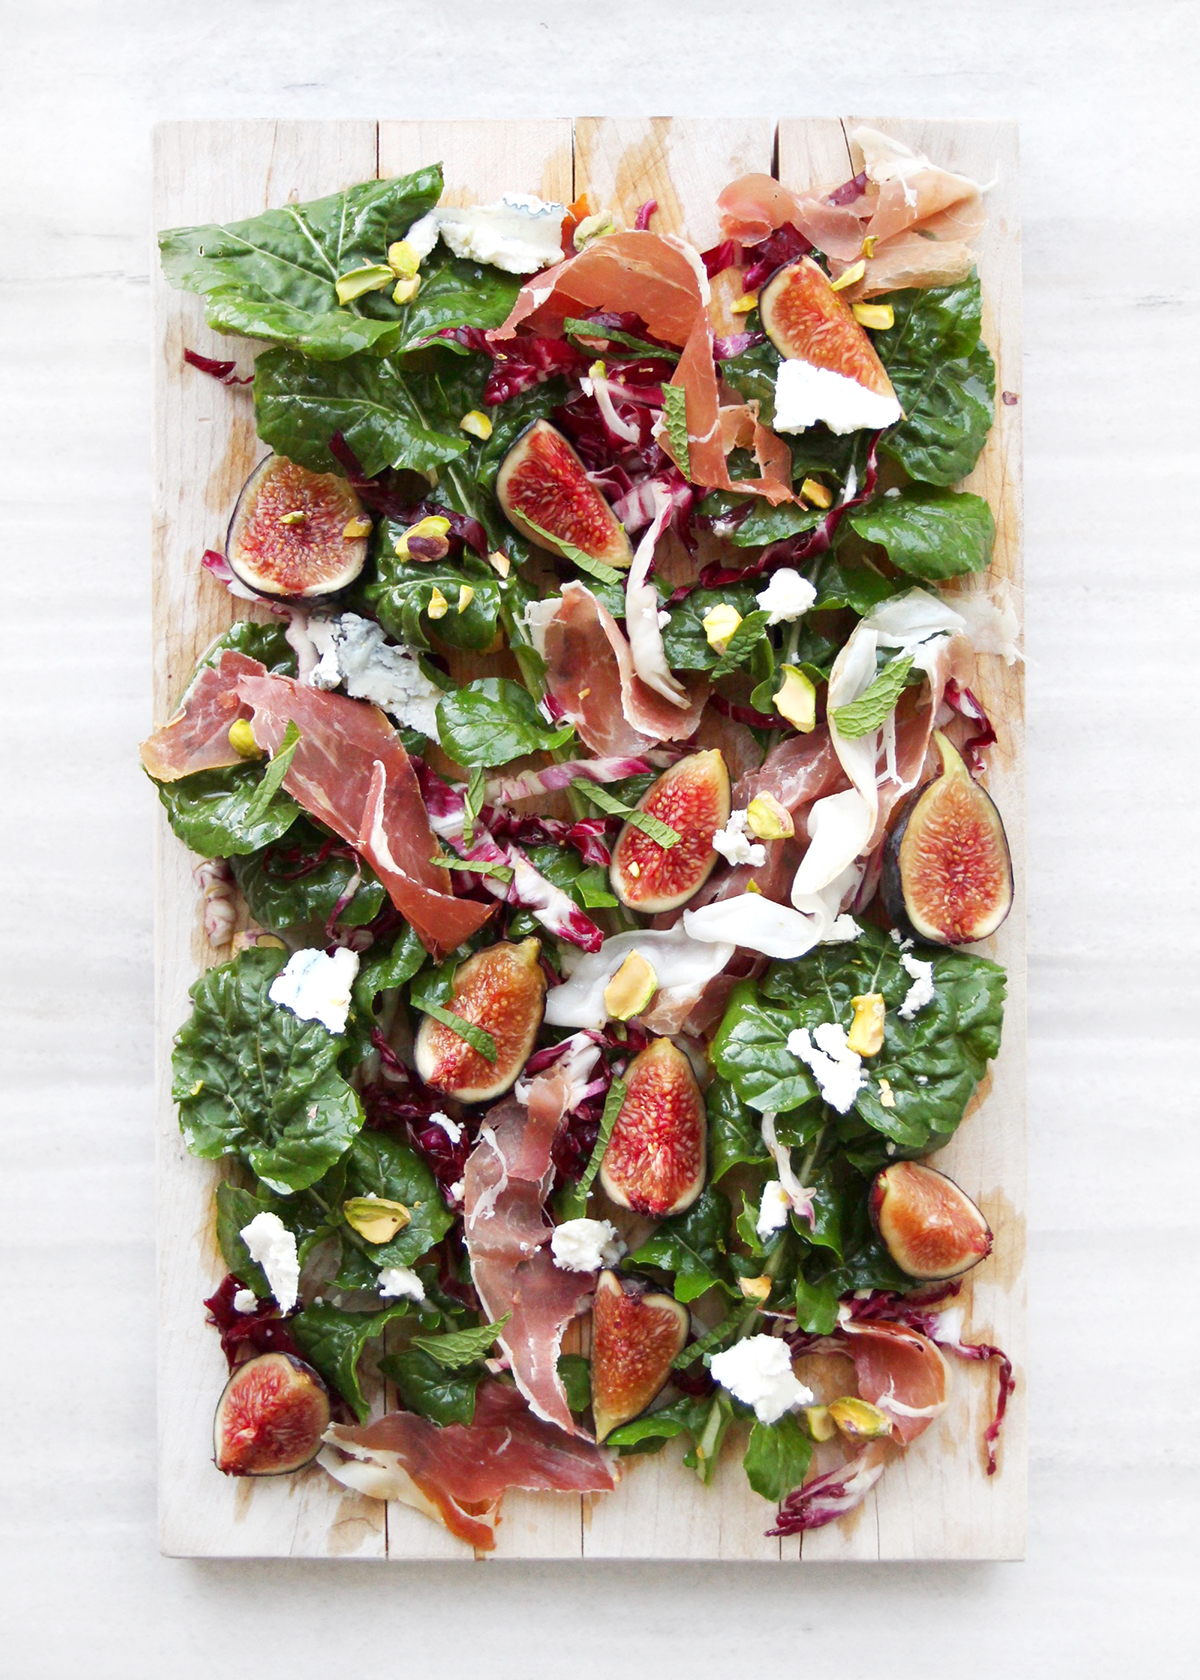 fig salad with arugula, prosciutto, and pistachios on wooden board